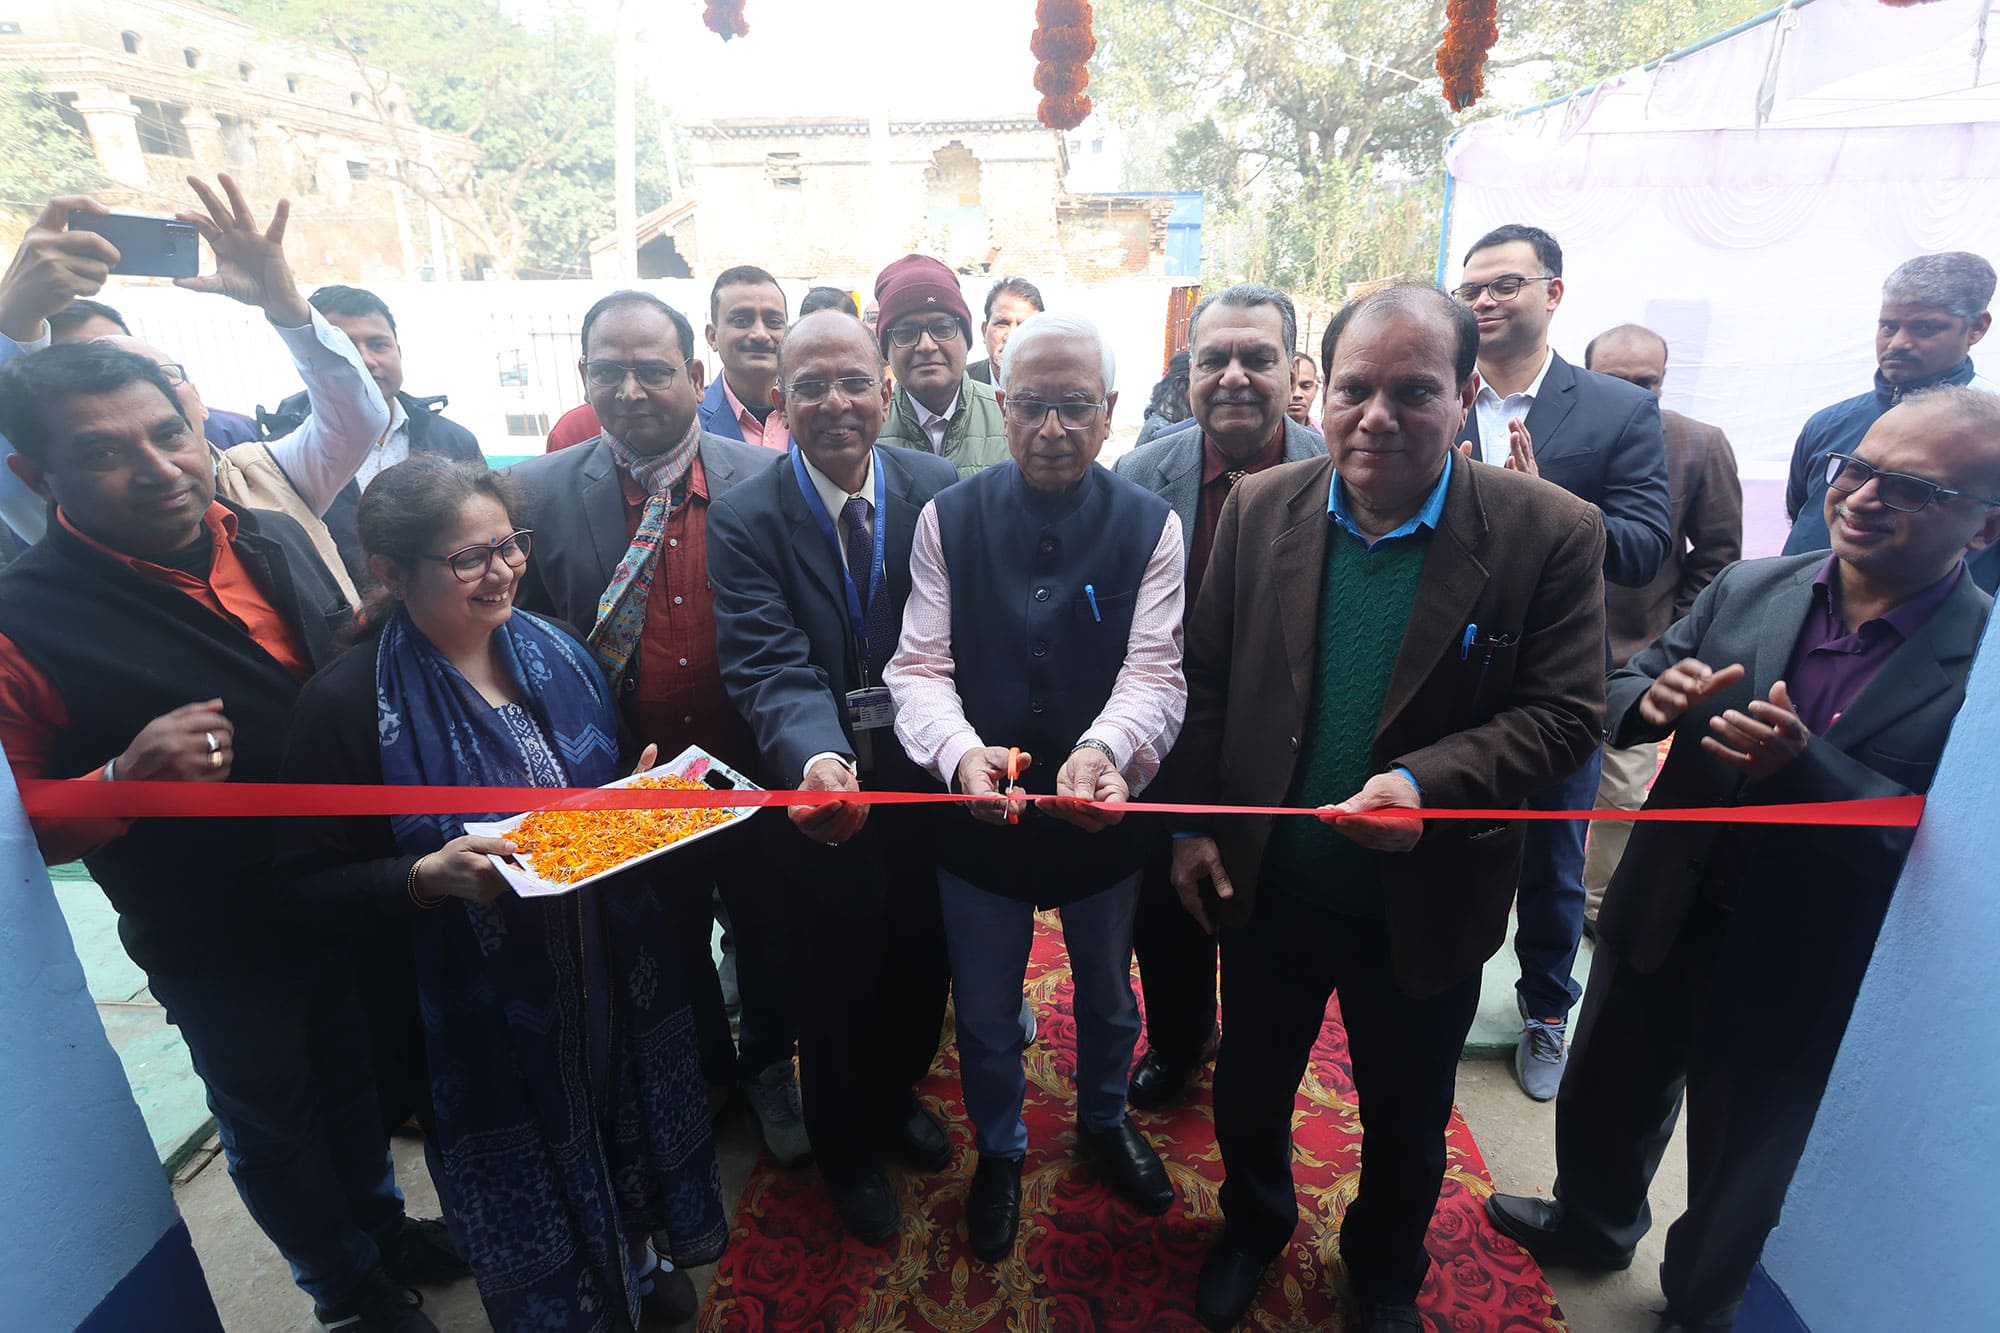 Ribbon cutting at a Centre of Excellence in India